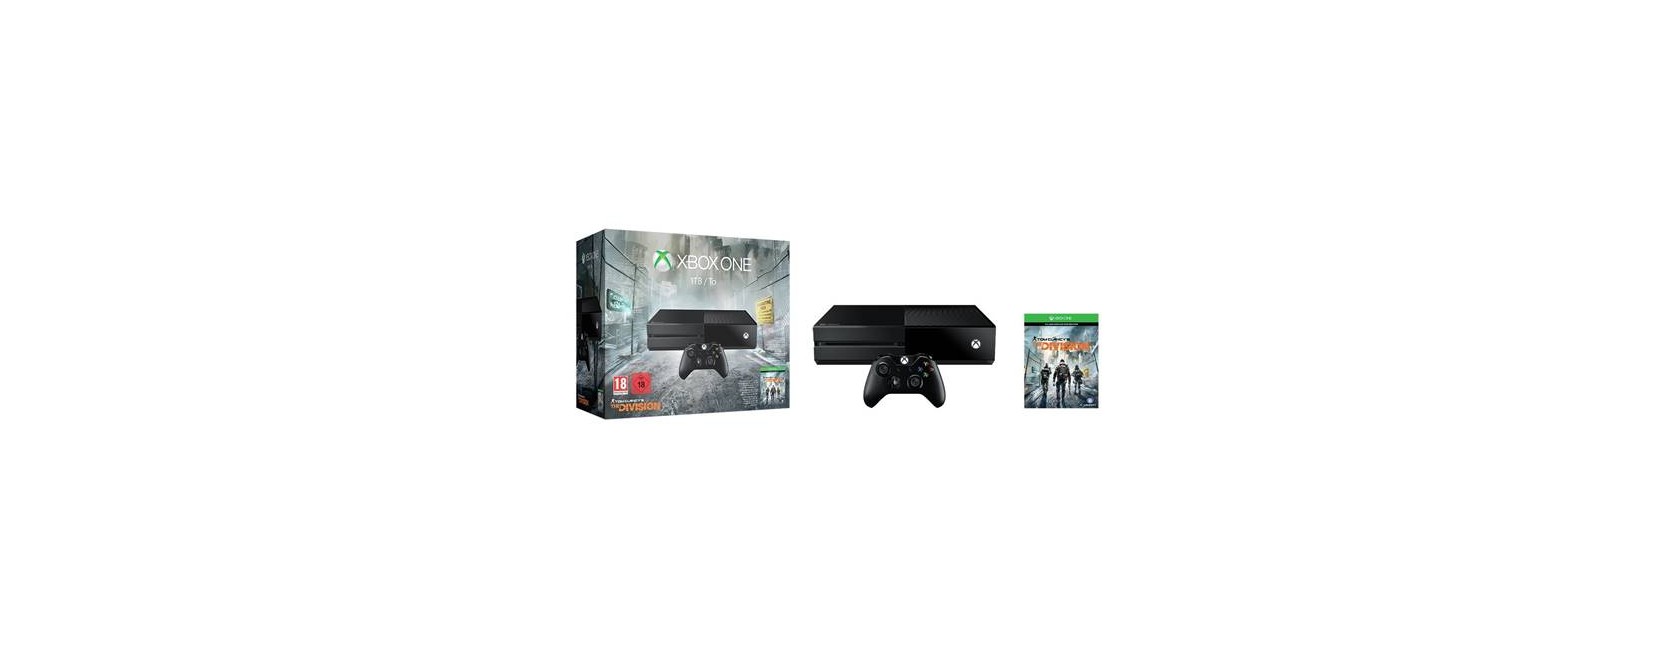 Tom clancy's the division - xbox one 1tb bundle